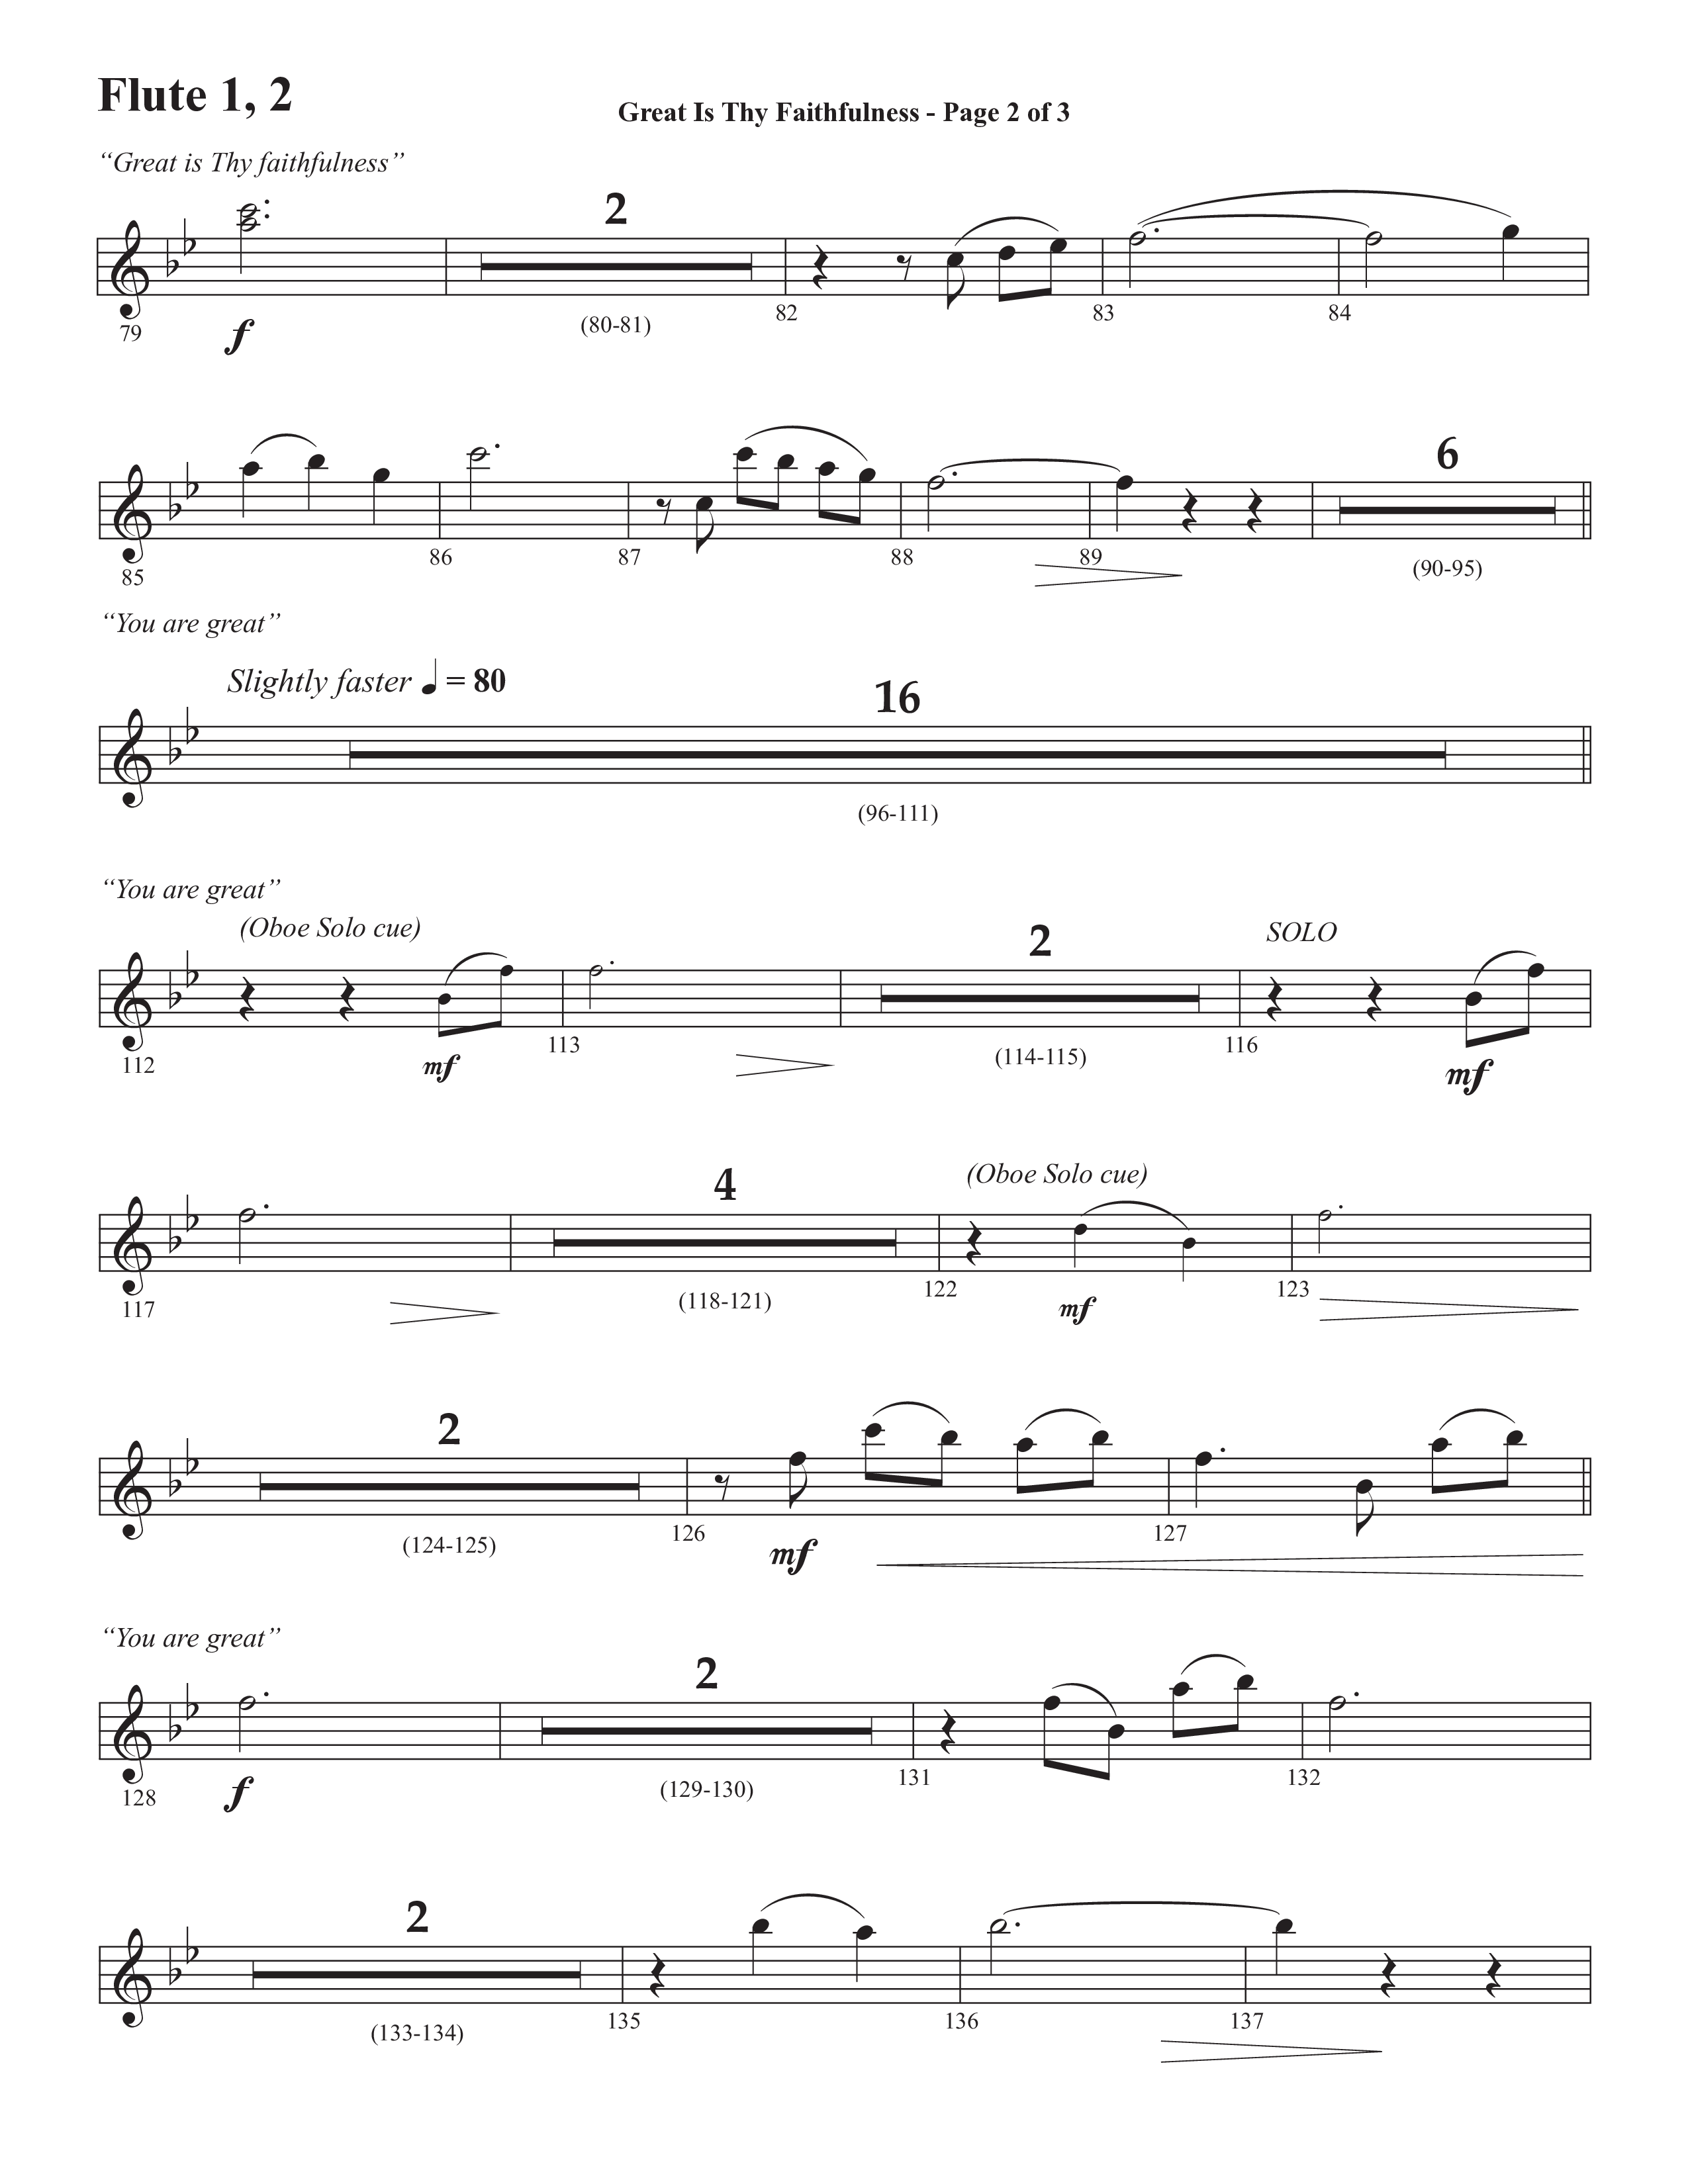 Great Is Thy Faithfulness (You Are Great) (Choral Anthem SATB) Flute 1/2 (Semsen Music / Arr. John Bolin / Orch. David Shipps)